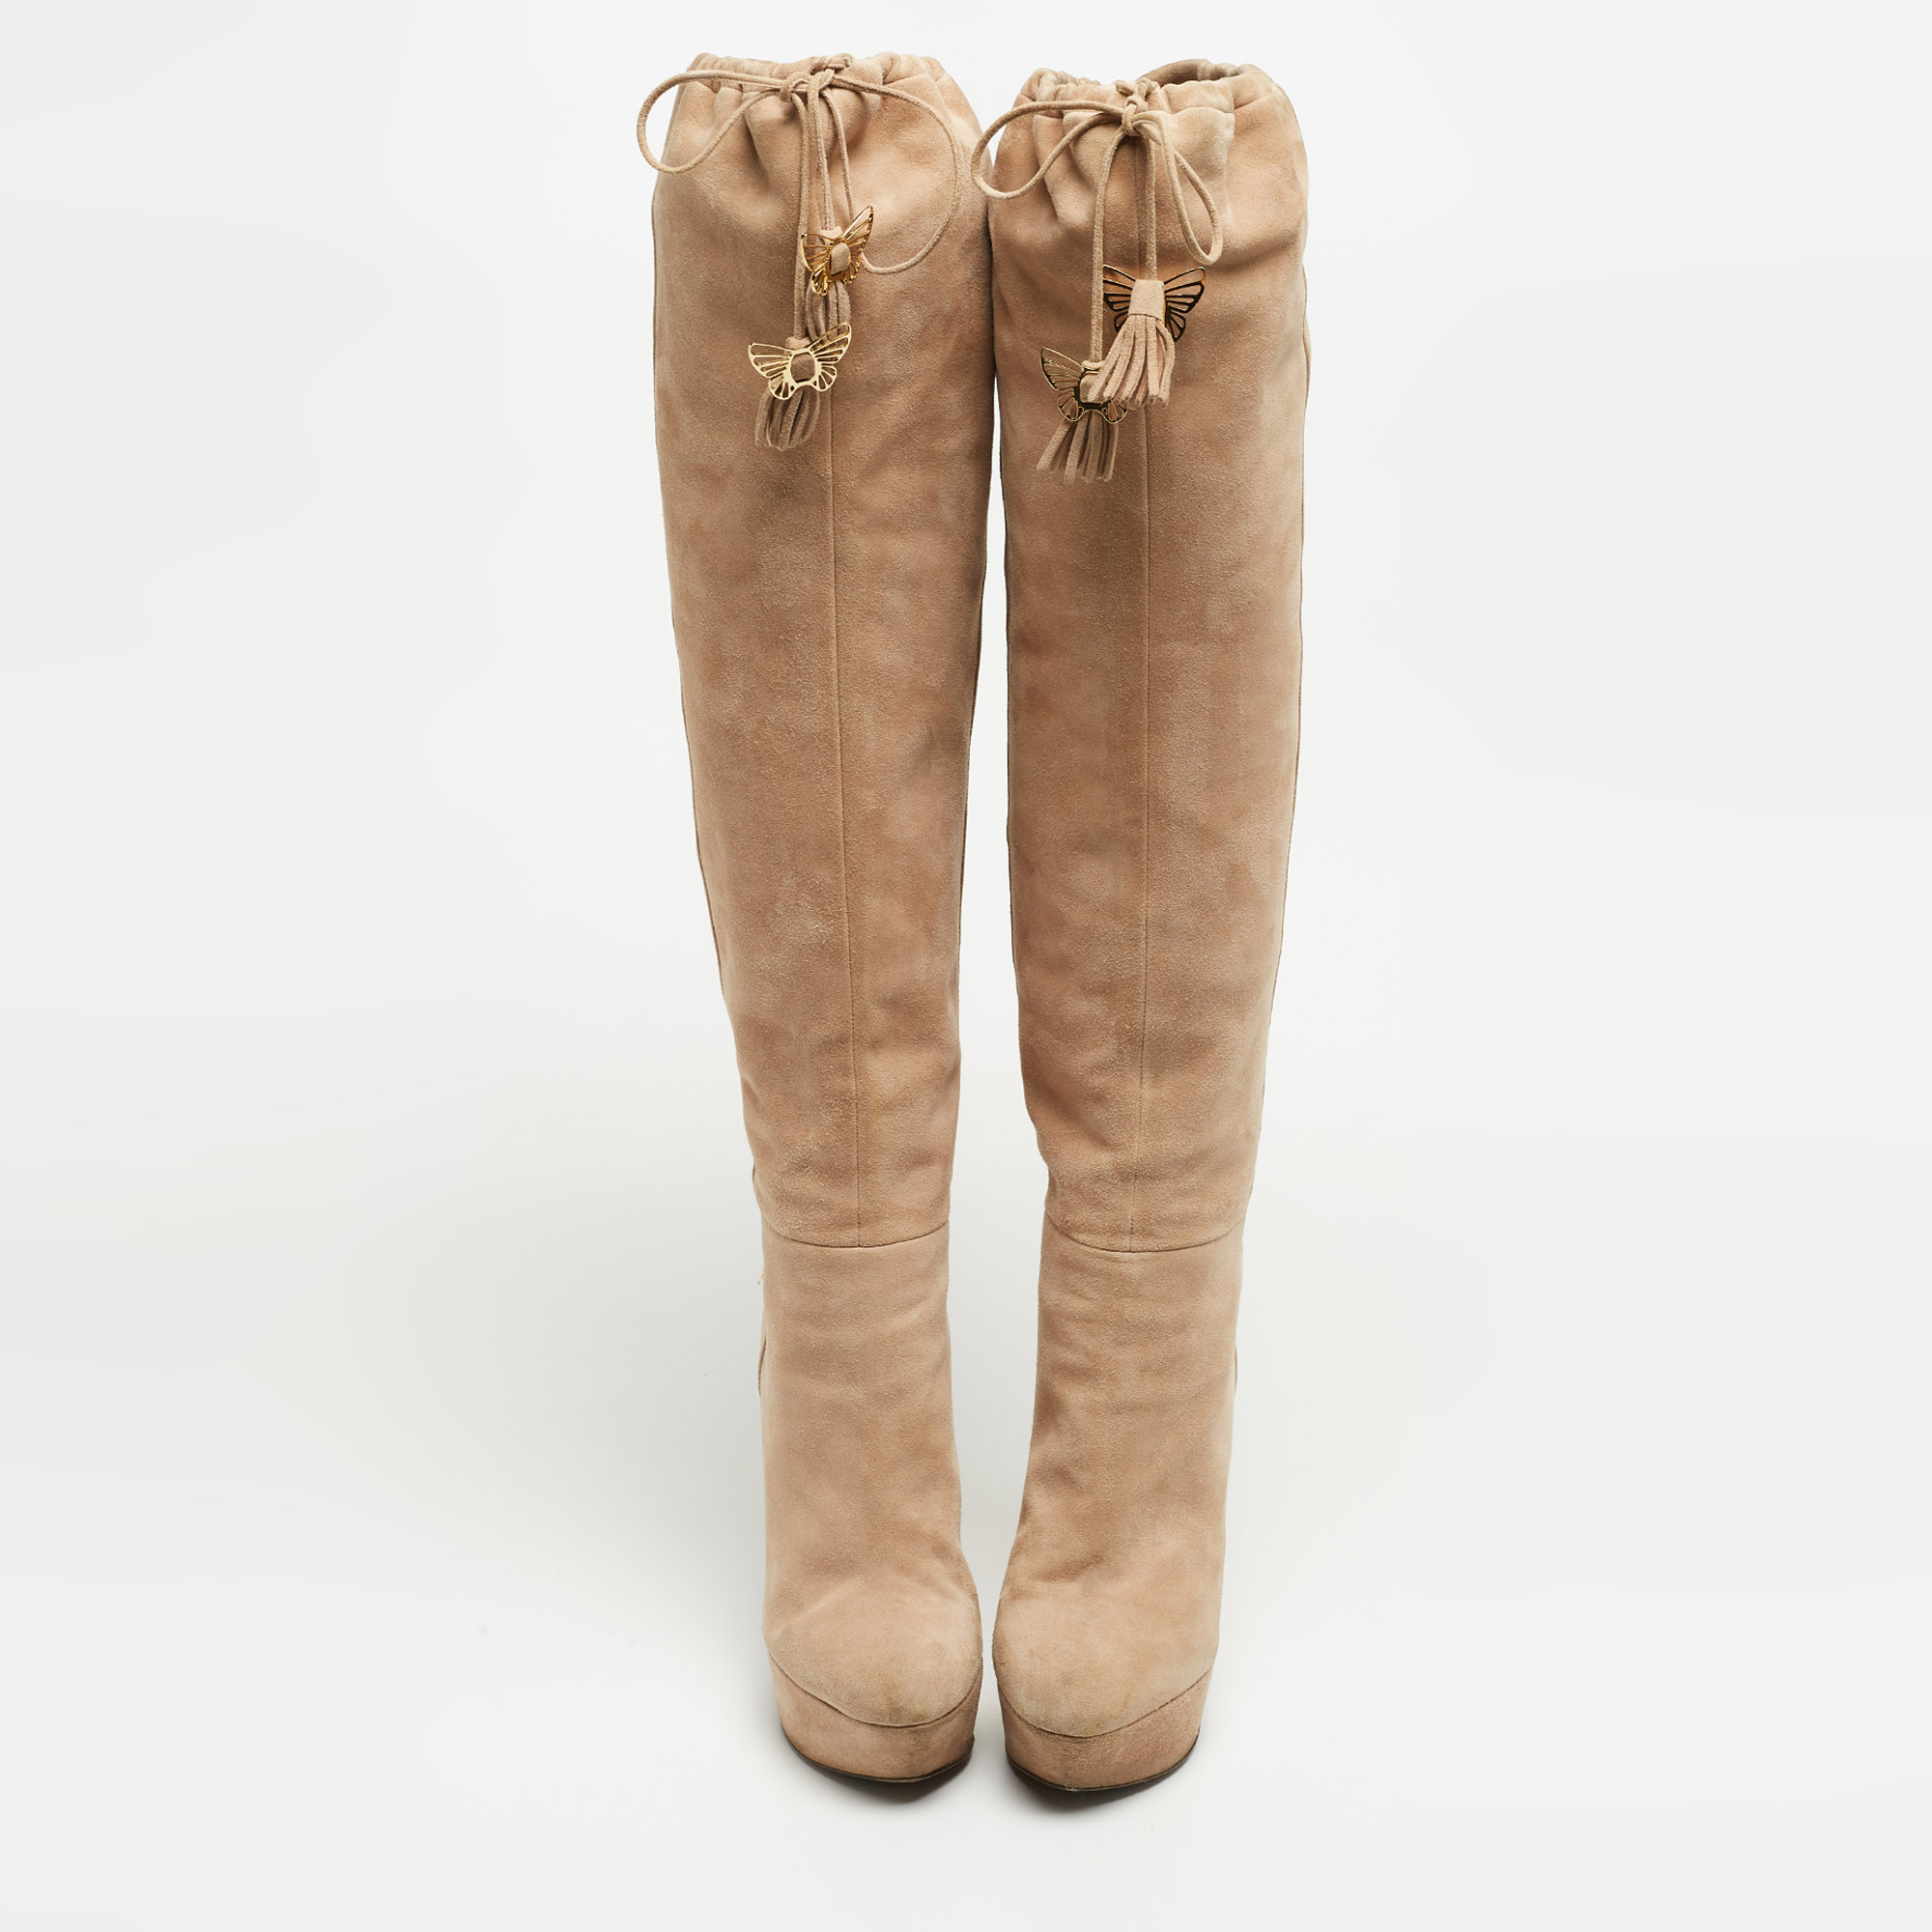 Sergio Rossi Beige Suede Knee Length Boots Size 38